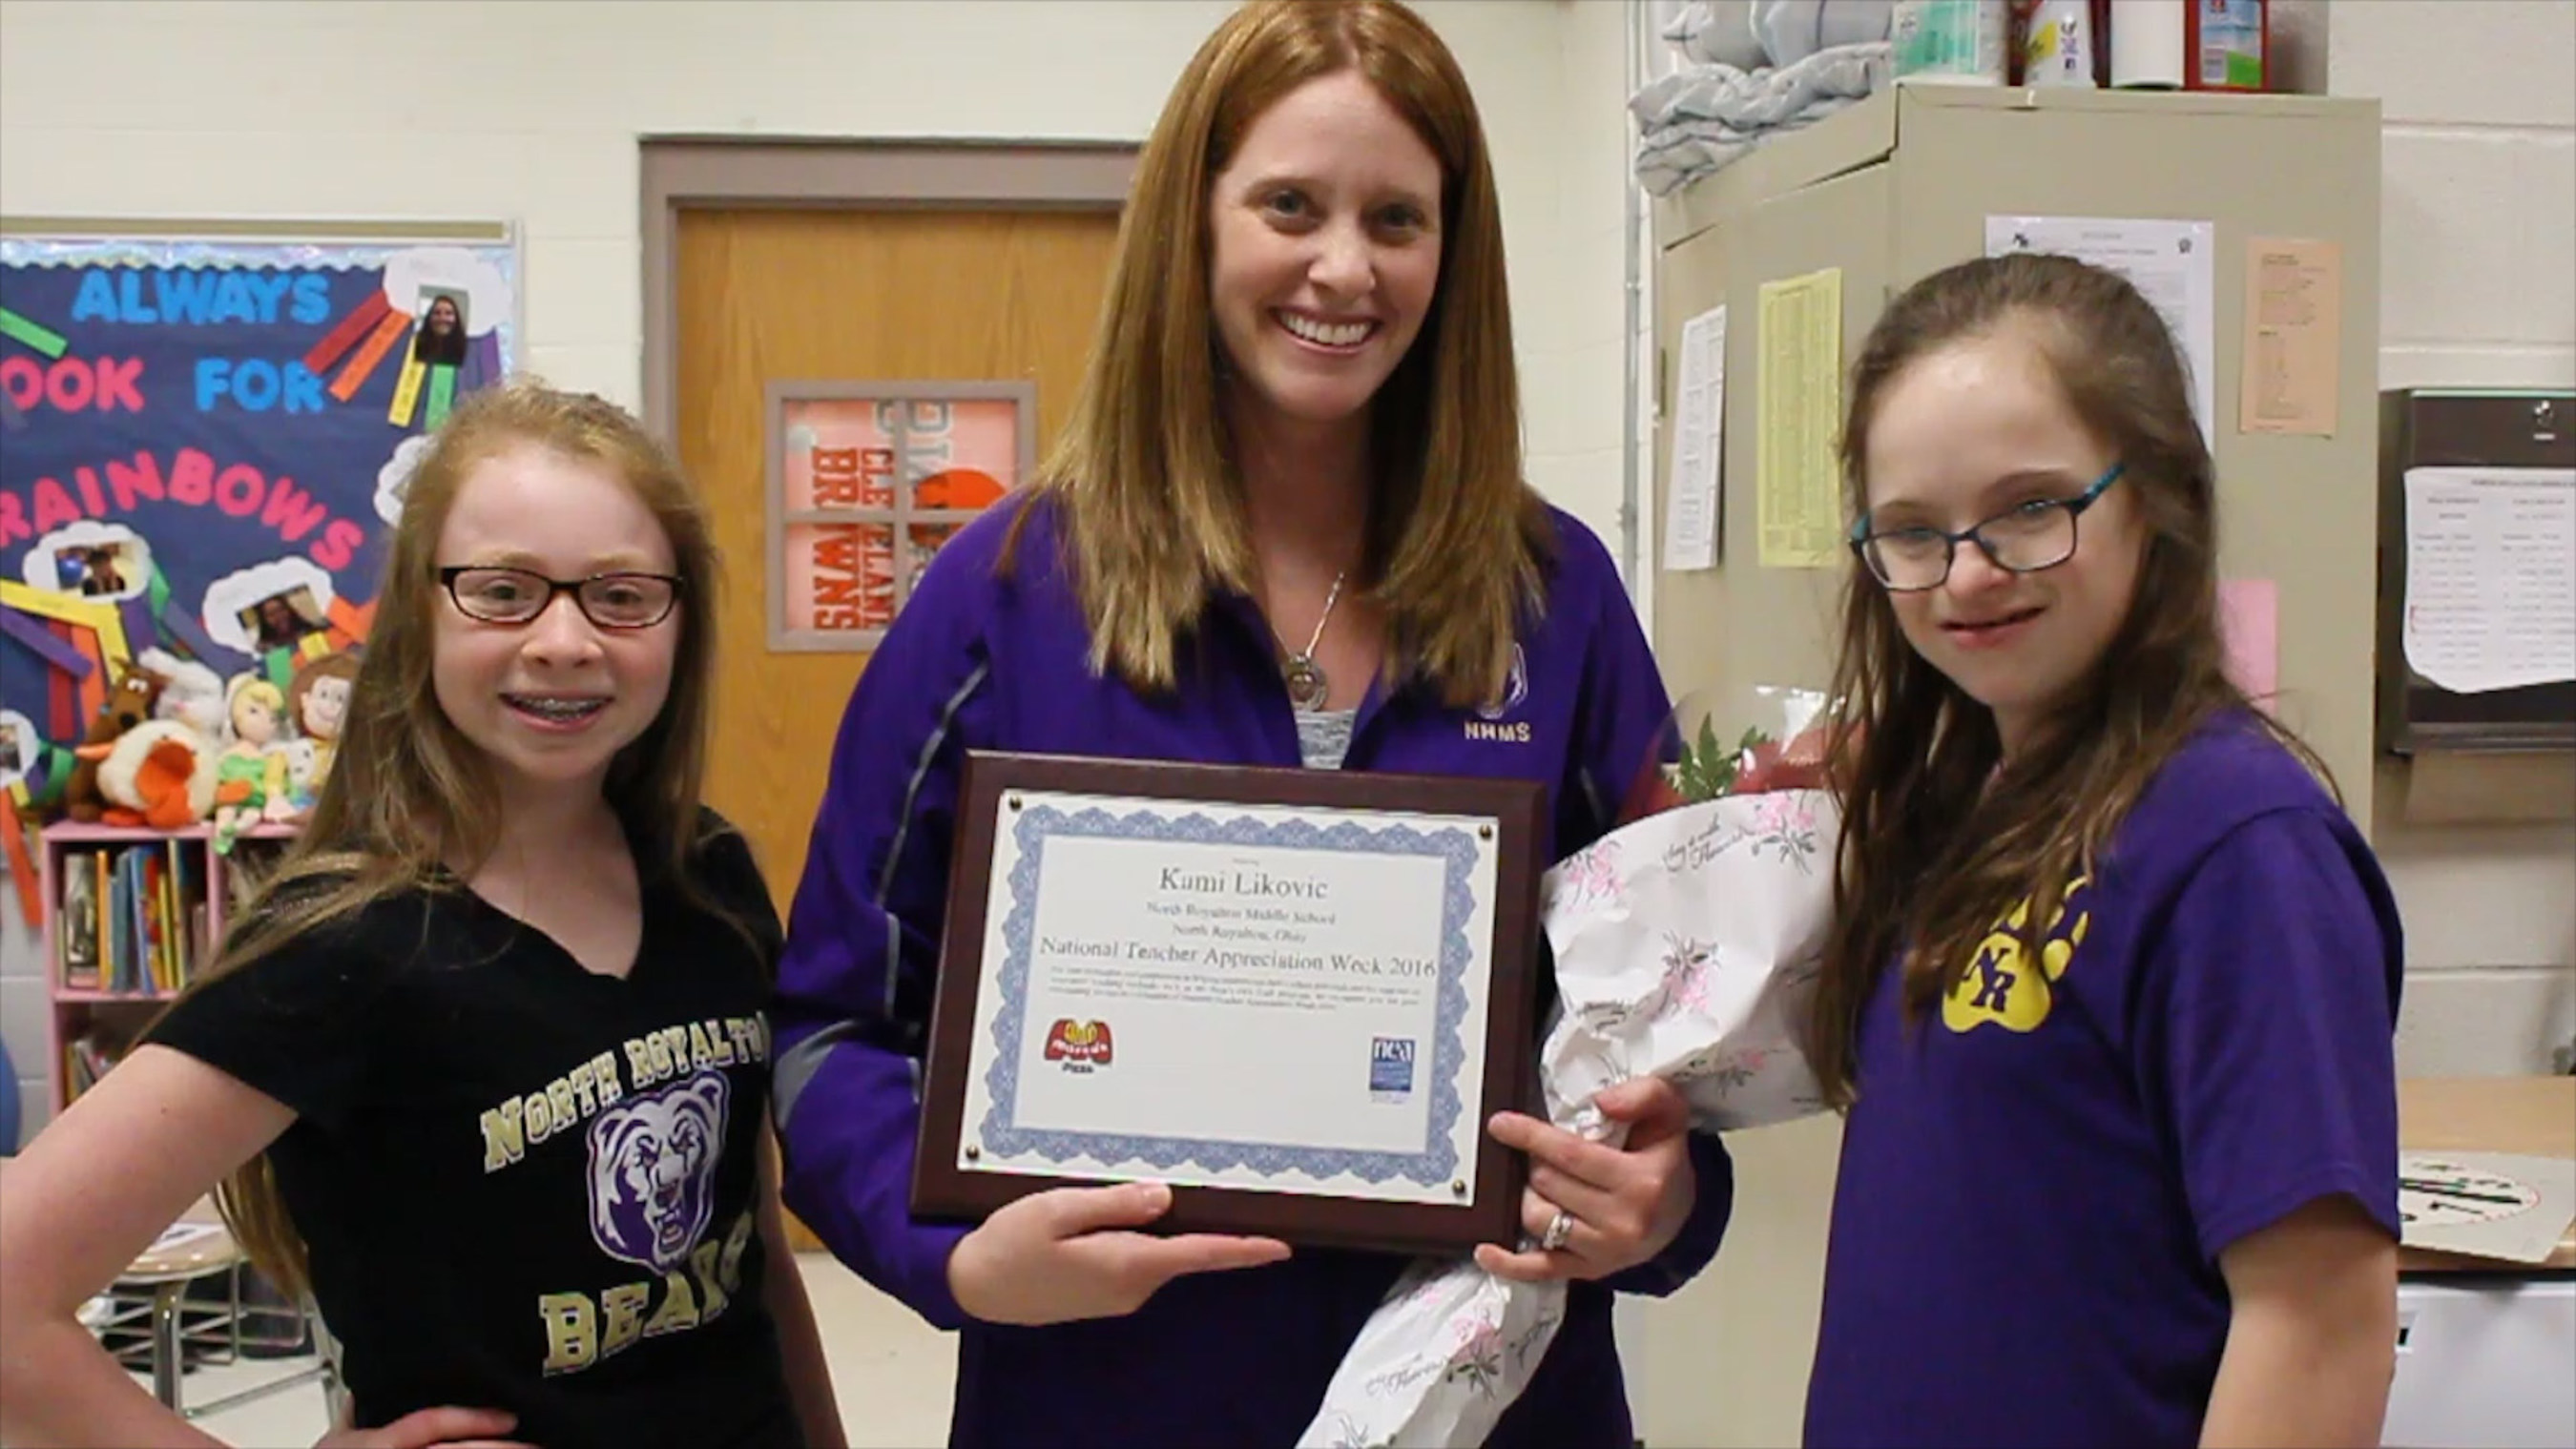 North Royalton Middle School teacher Kami Likovic, an intervention specialist for students with special needs, was surprised with a pizza party and flowers by her class.  Marco's Pizza will be distributing 250,000 free pizza certificates to schools as part of Teacher Appreciation Week.